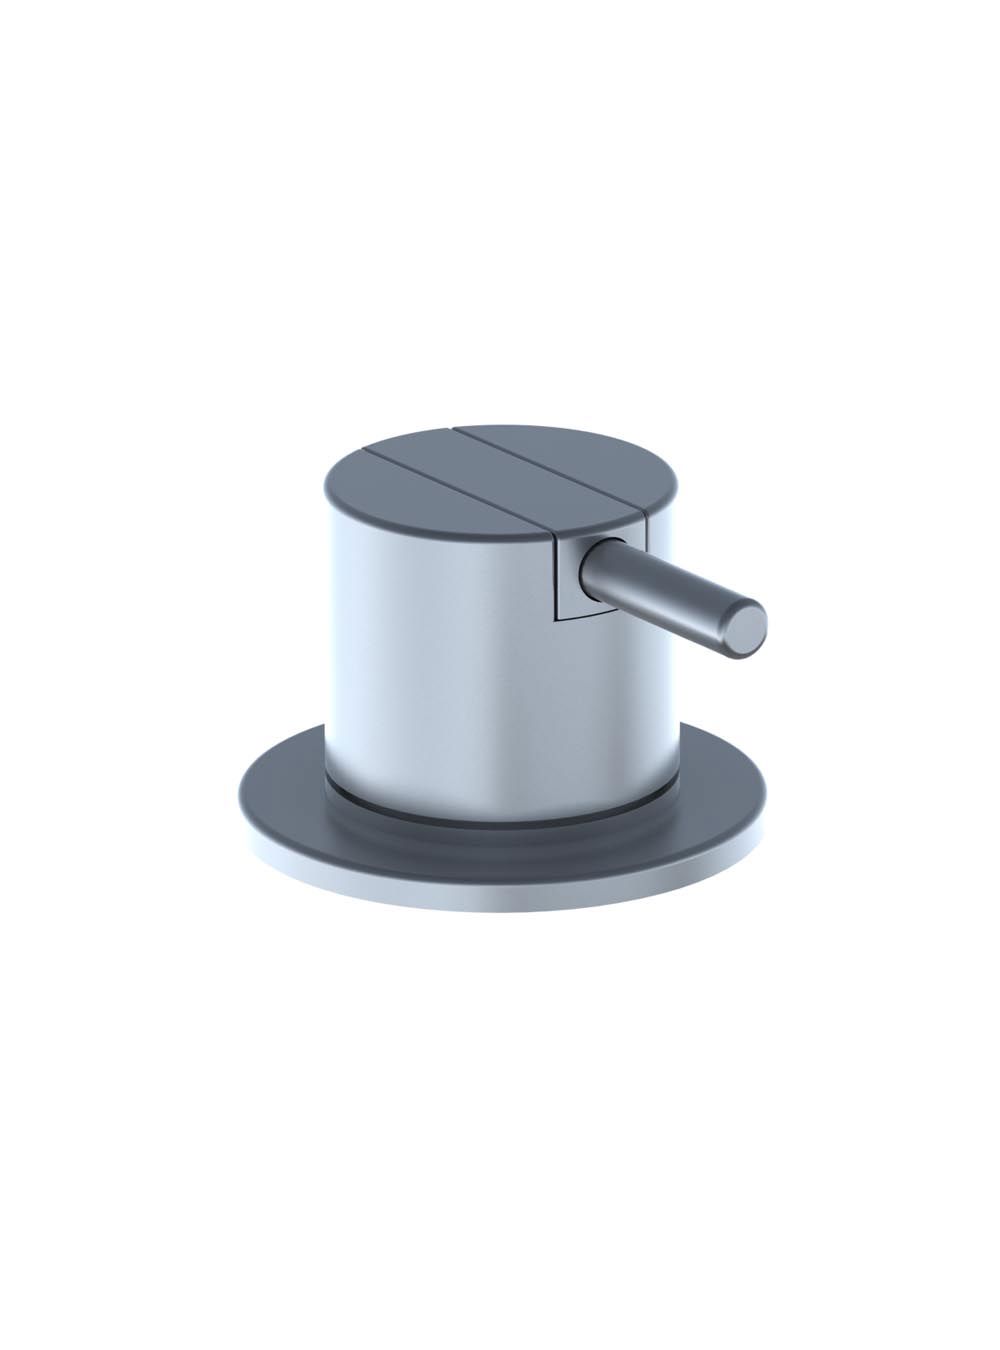 SC1: One-handle mixer 2500 can be used in conjunction with A24.A24 sold separately.